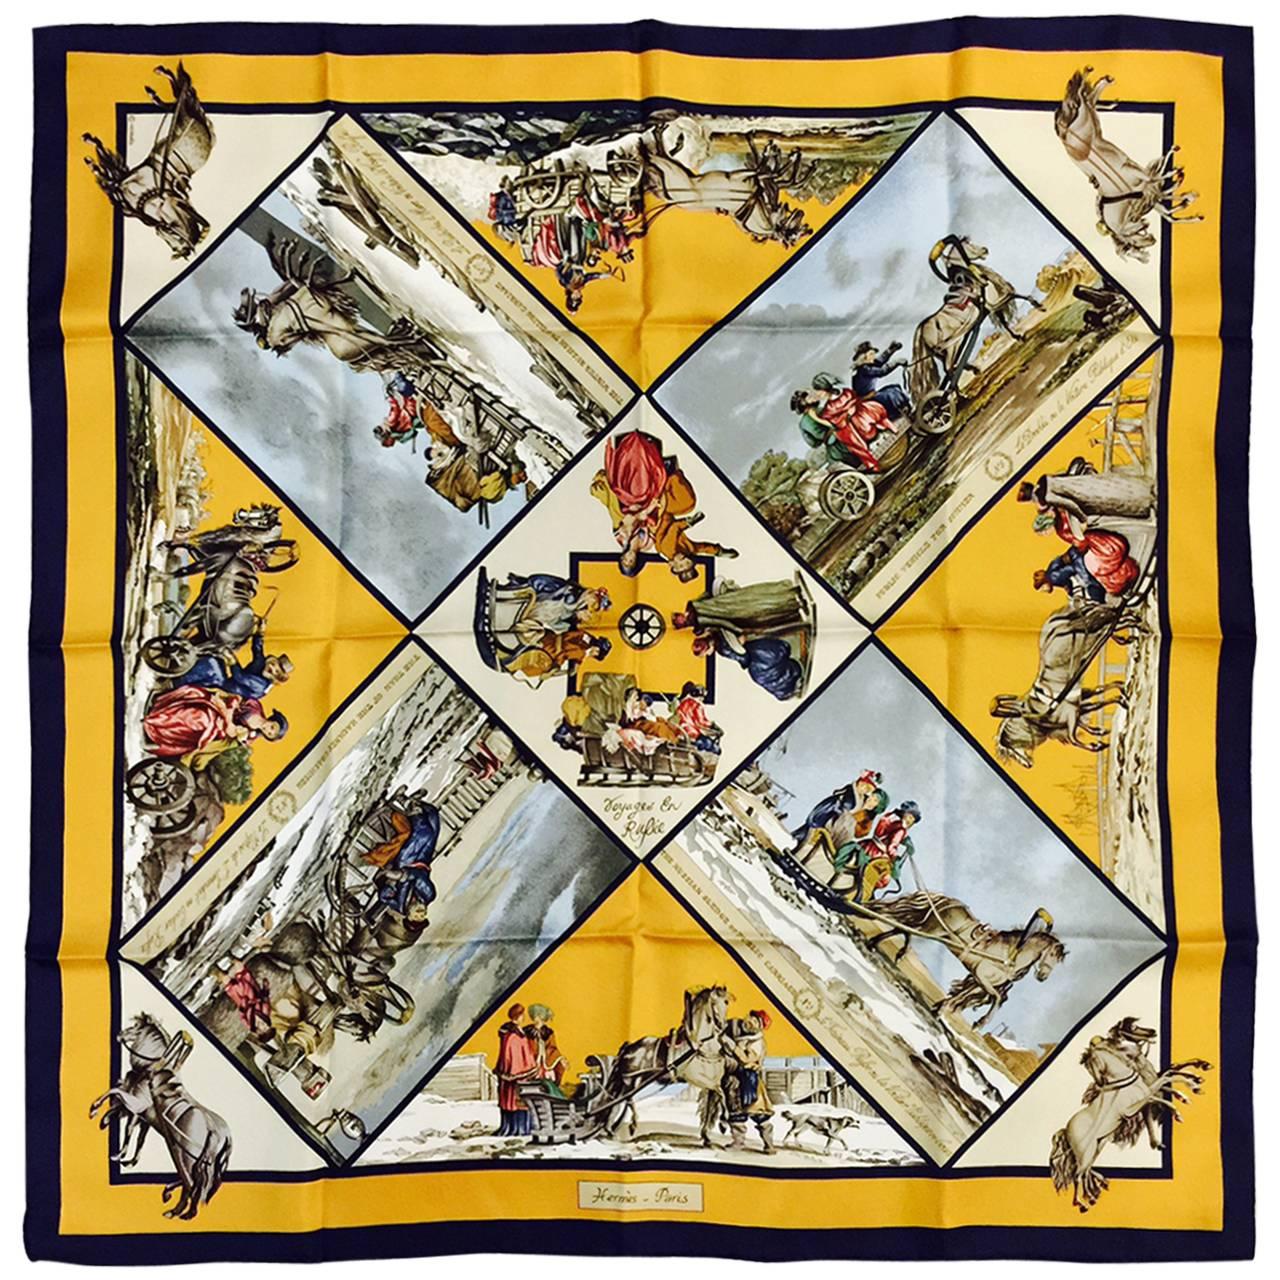 Hermes Old Gold and Navy Voyage en Russie Silk Twill Scarf by Loic Dubigeon